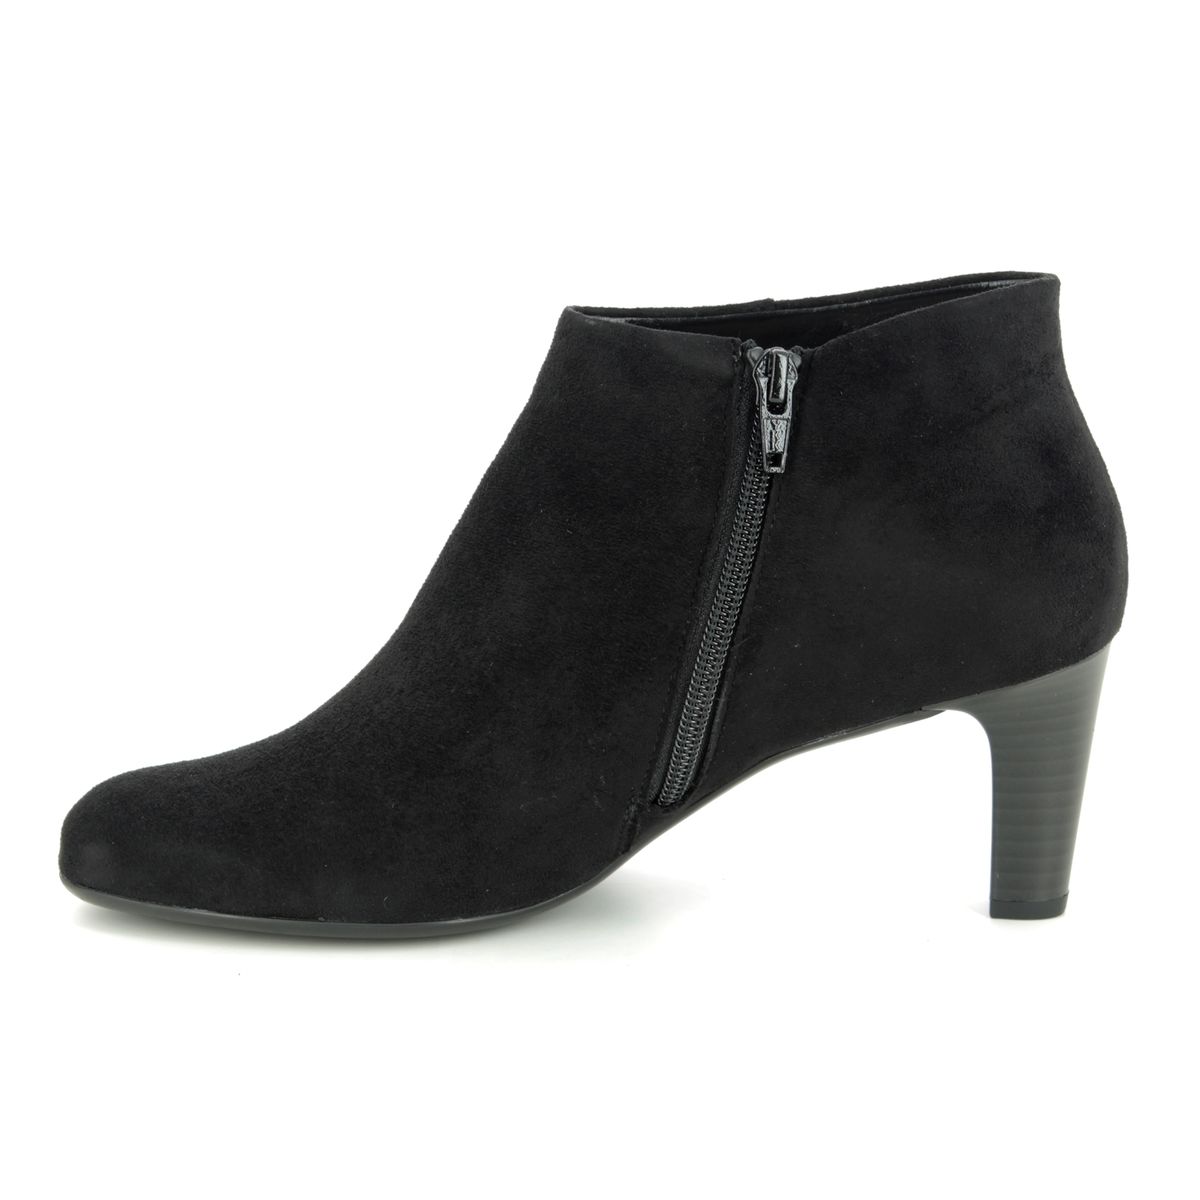 gabor ankle boots ireland